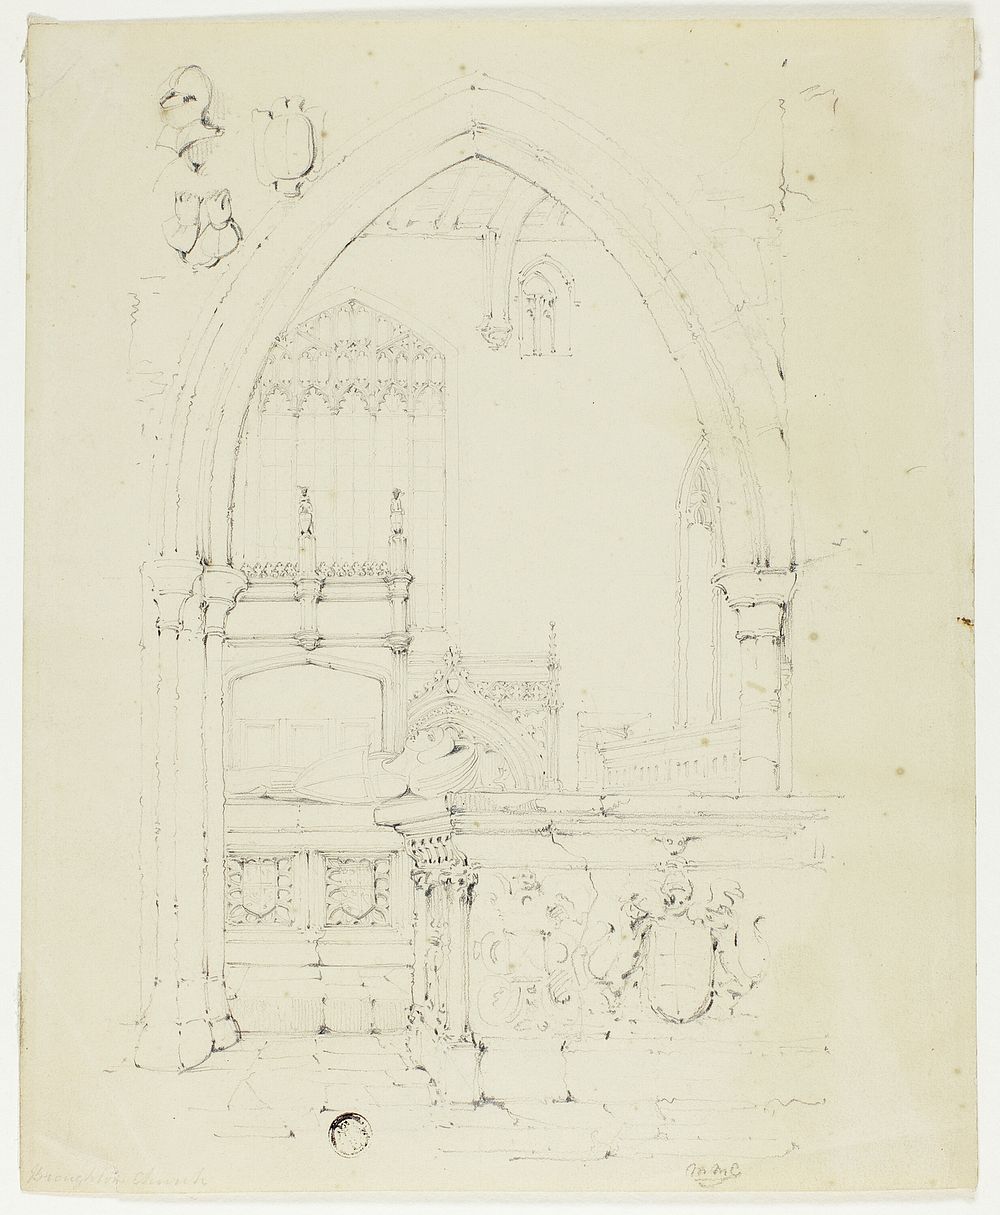 Broughton Church by Style of Samuel Prout